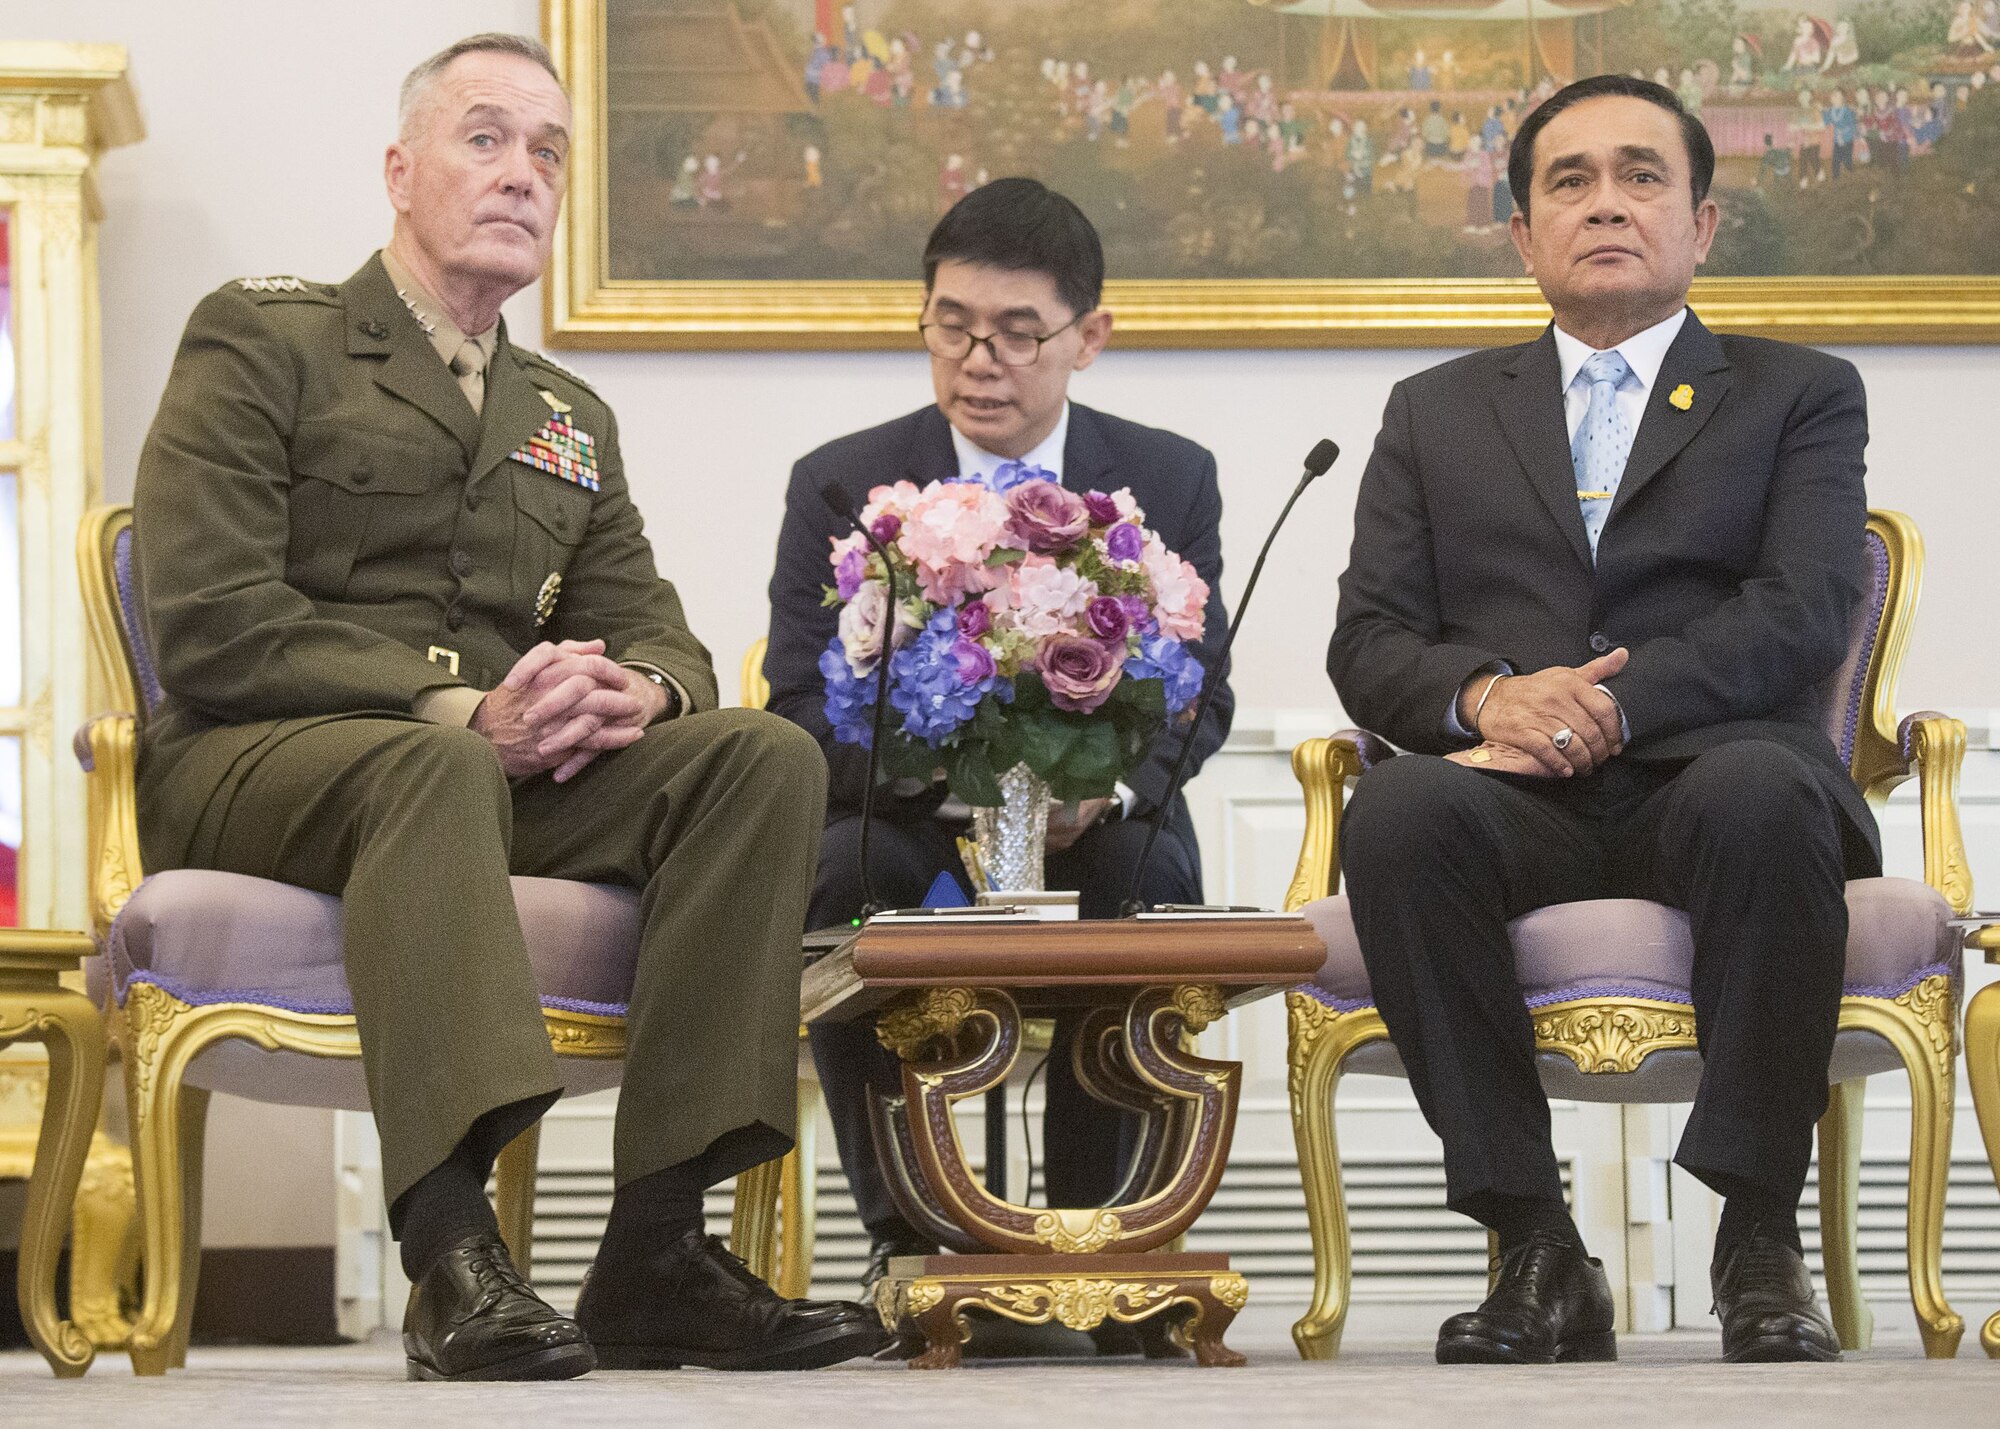 Marine Corps Gen. Joe Dunford, chairman of the Joint Chiefs of Staff, meets with Prime Minister Prayut Chan-ocha at the Government House in Bangkok, Feb. 7, 2018.